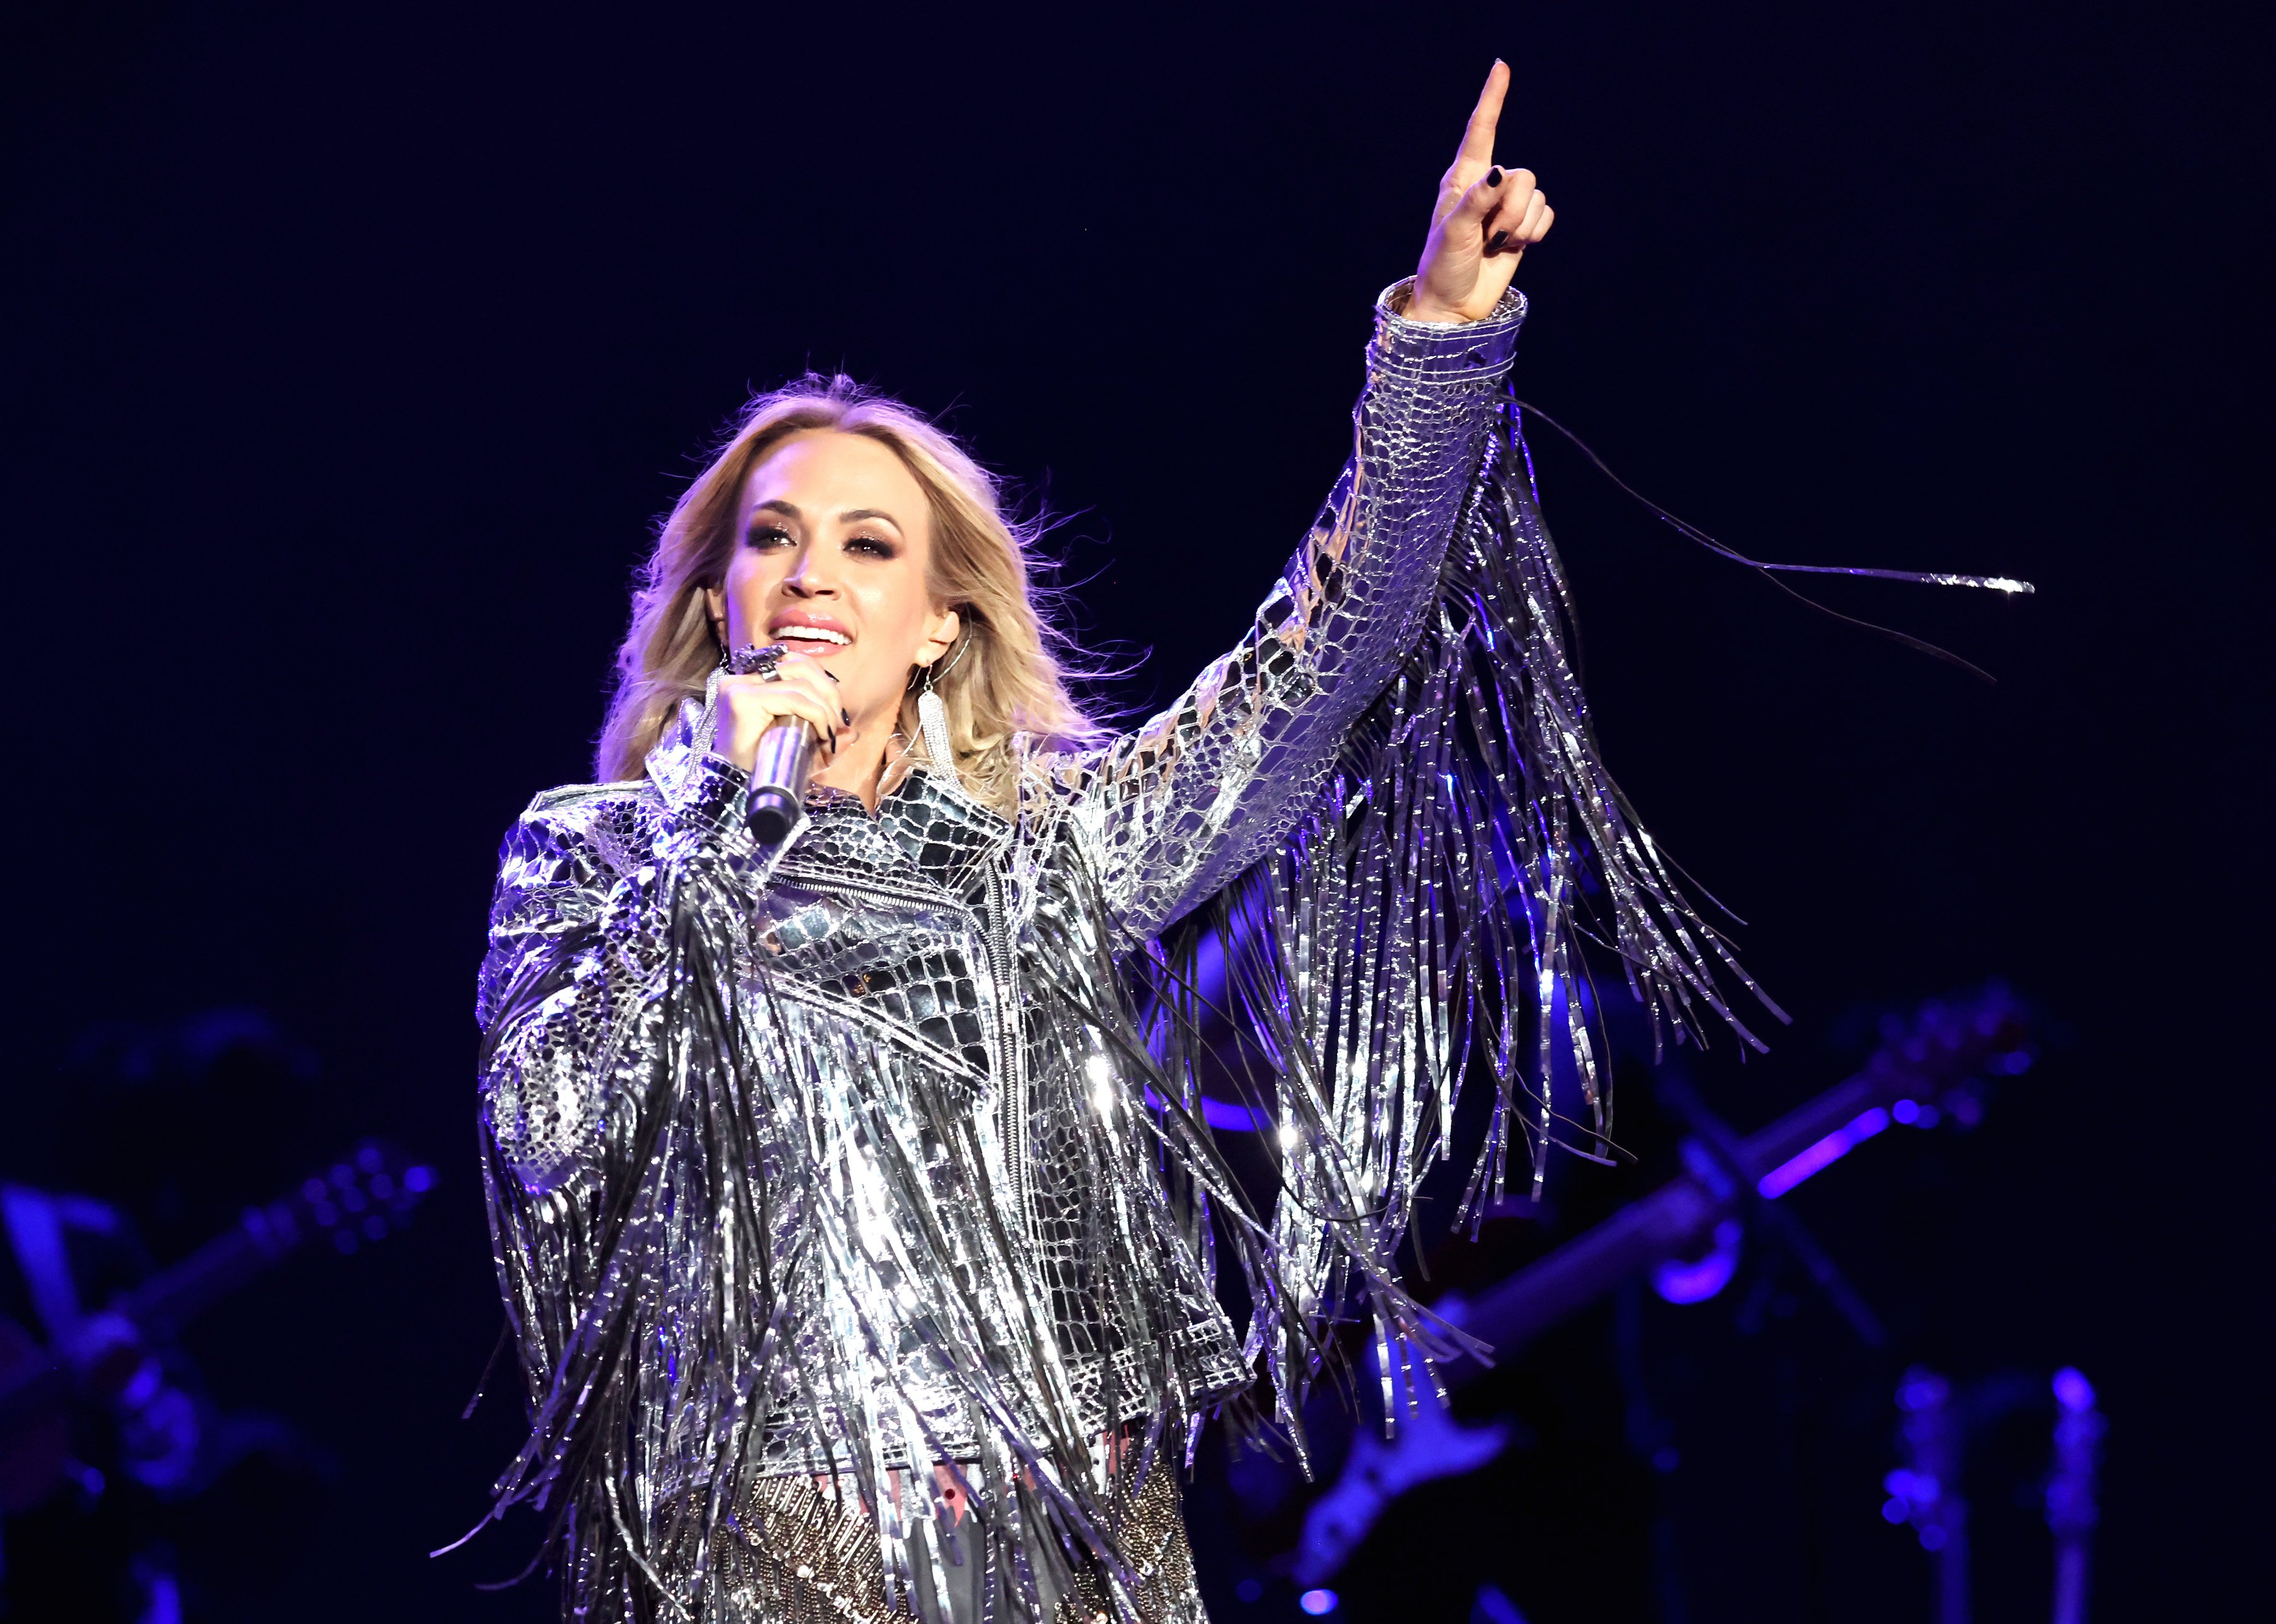 Carrie Underwood stands on stage and points at the sky while wearing a metallic outfit